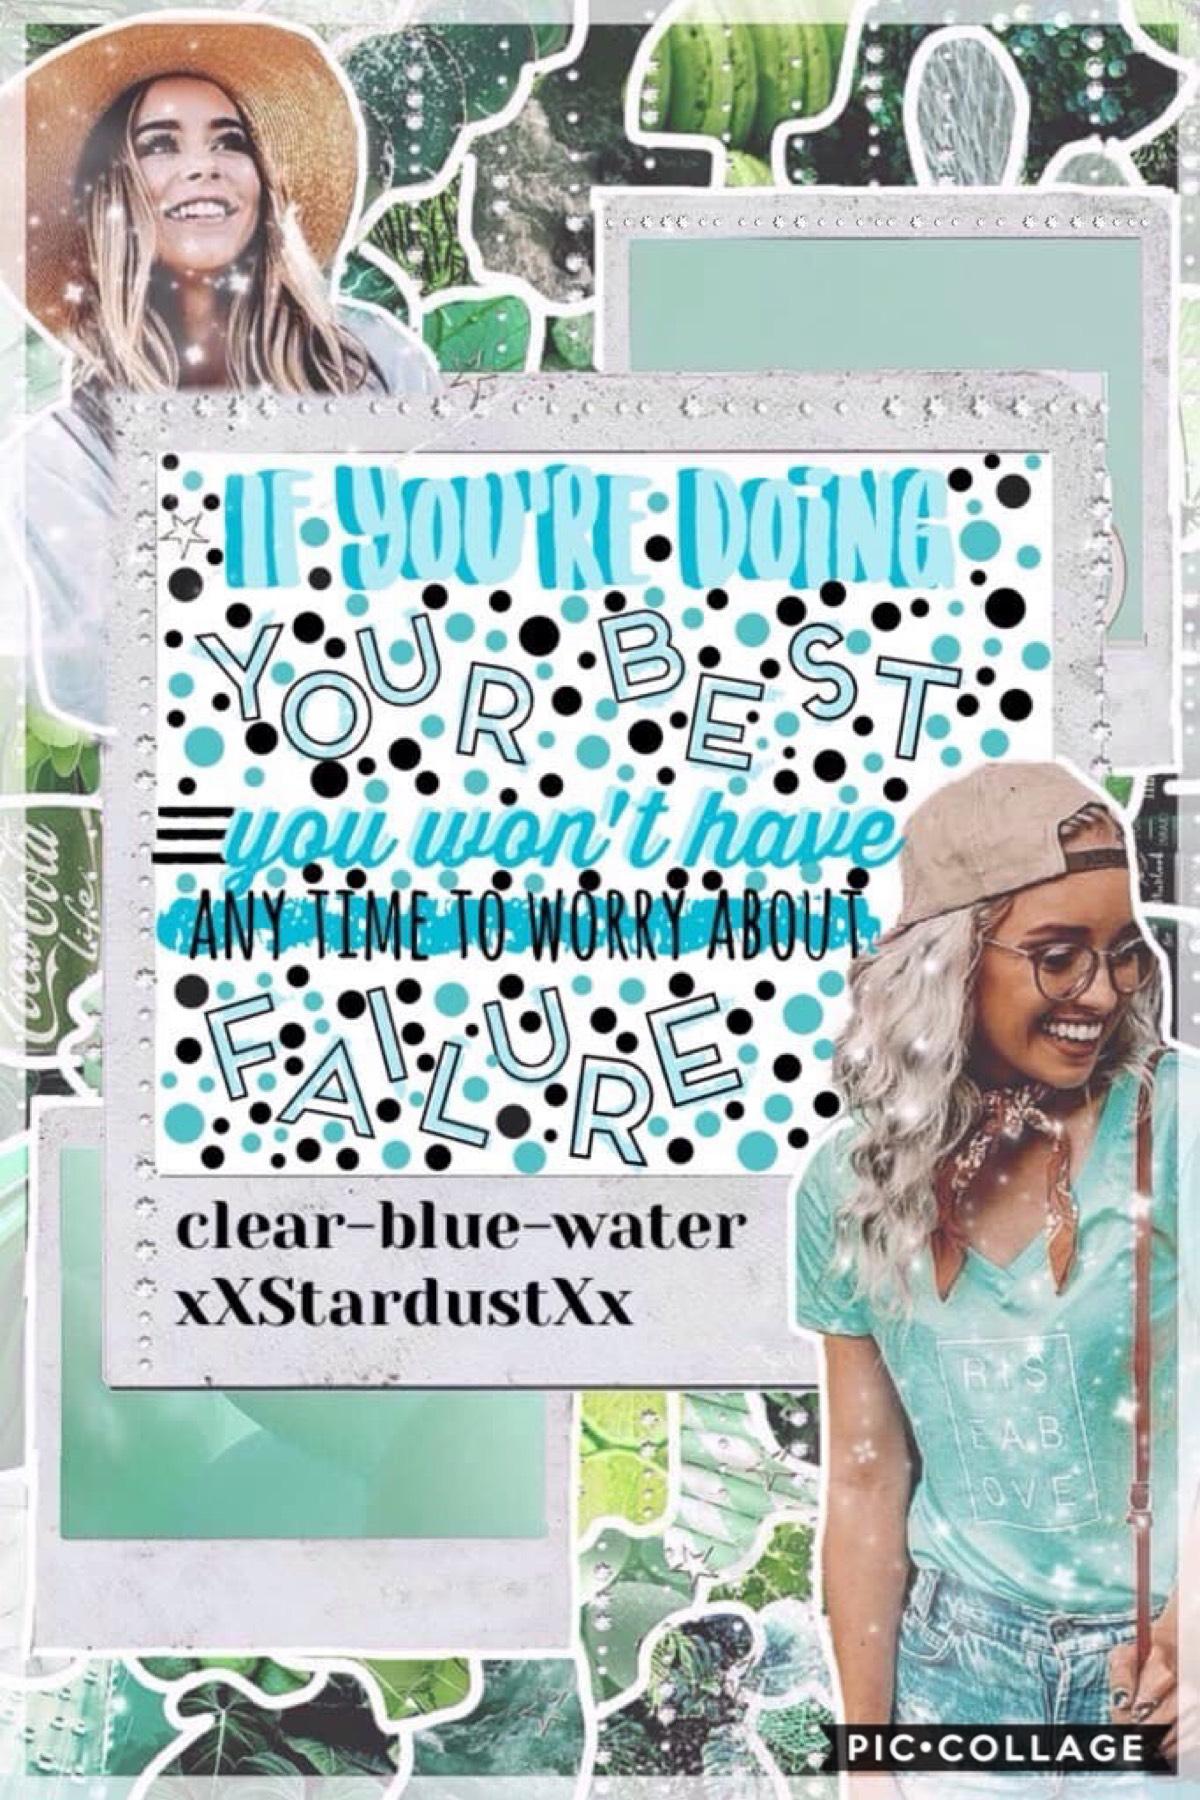 Collab with the amazing 🥁🥁🥁🥁🥁
clear-blue-water go follow her now
She is an amazing collager